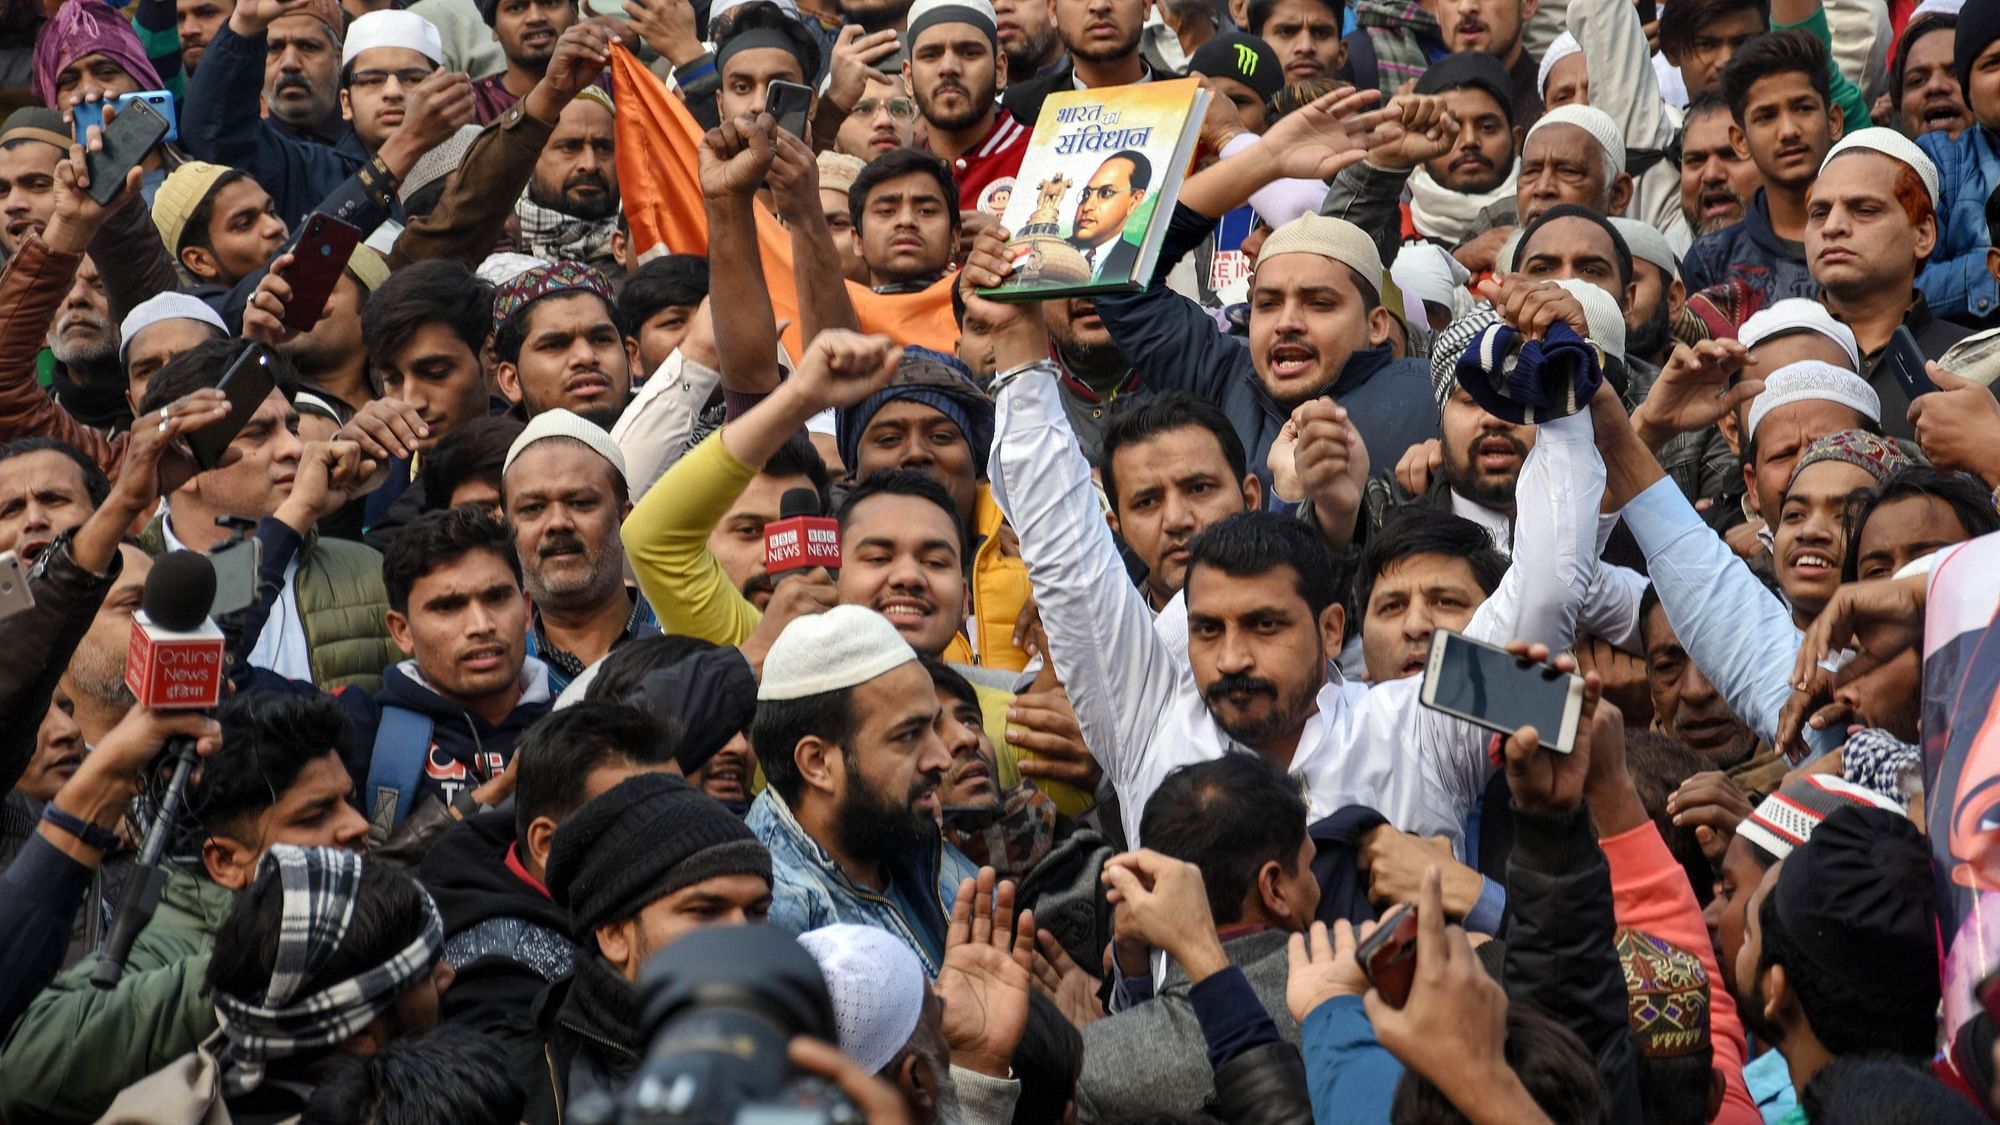 Bhim Army chief Chandrashekhar Azad holds up a copy of the Constitution of India at the Jama Masjid protest against the Citizenship Amendment Act on 20 December 2019.